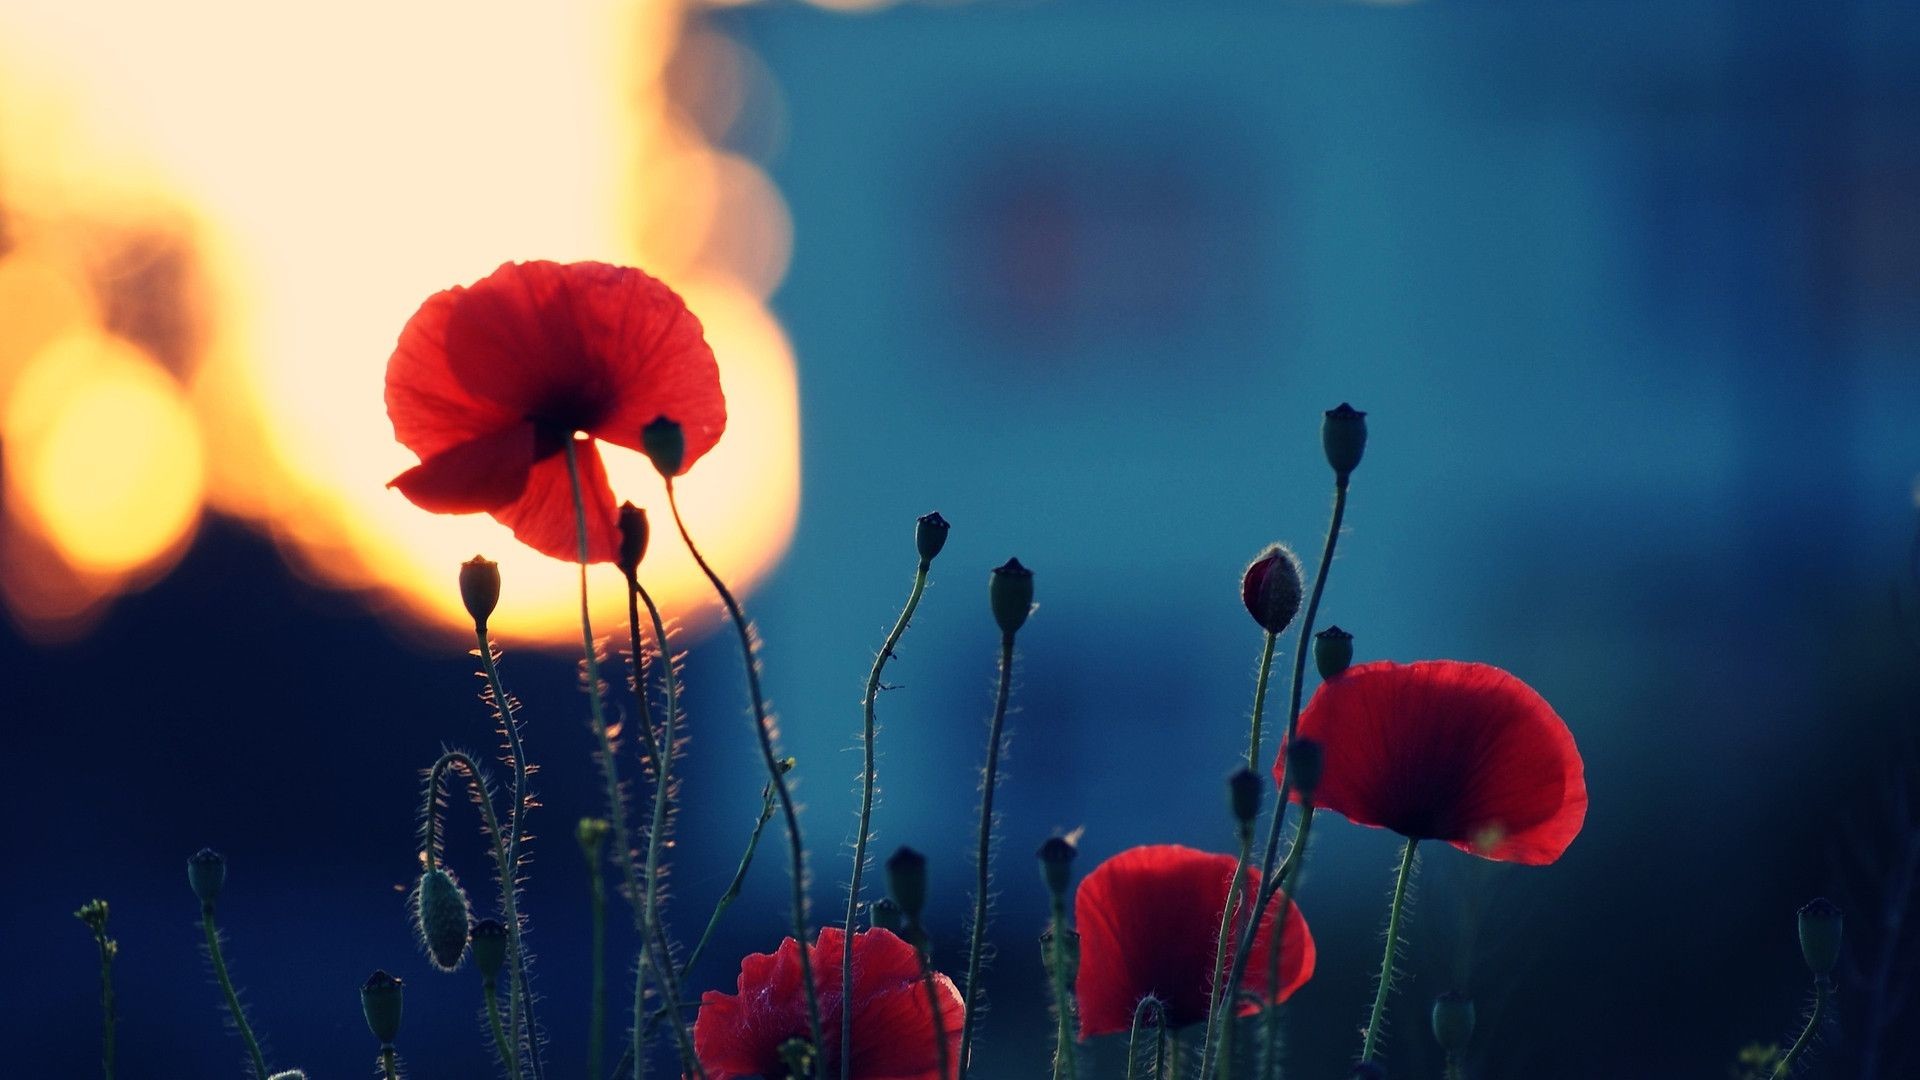 1920x1080 Pictures Of Poppies Wallpapers (38 Wallpapers)